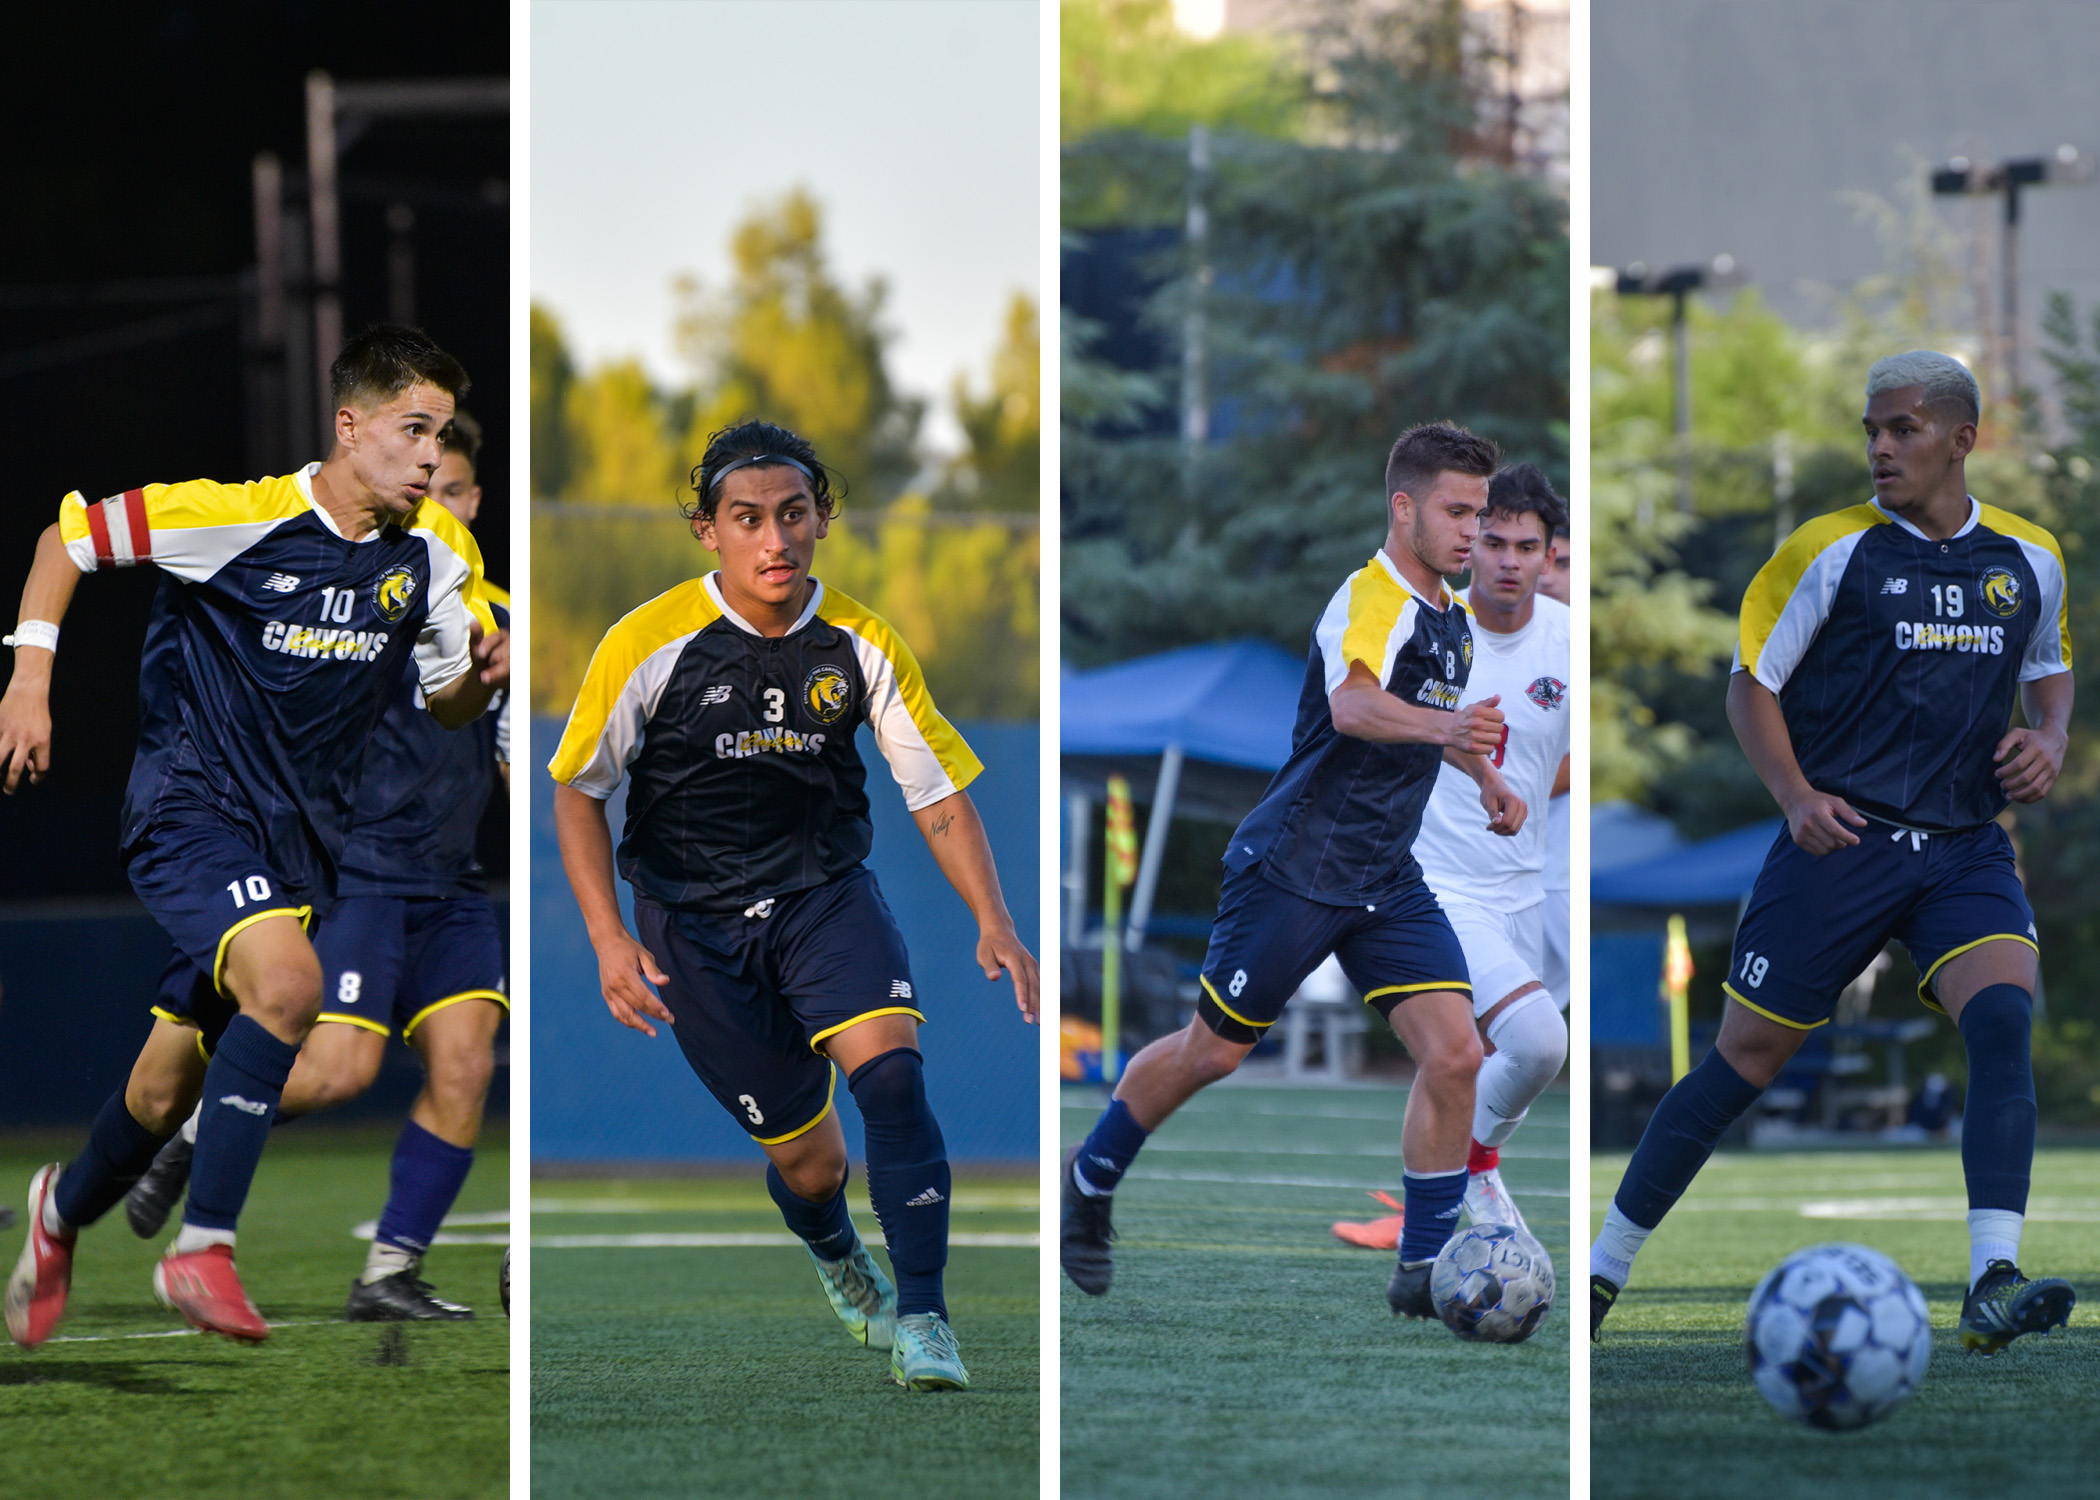 (from left to right) College of the Canyons had seven players earn All-Western State Conference (WSC), South Division honors including Francisco Ornelas, Bryan Velasquez, Drew Leskin and Darian Cerin. The Cougars (6-7-8, 2-3-3) finished the 2021 season third in the WSC, South. &mdash; Mari Kneisel/COC Sports Information